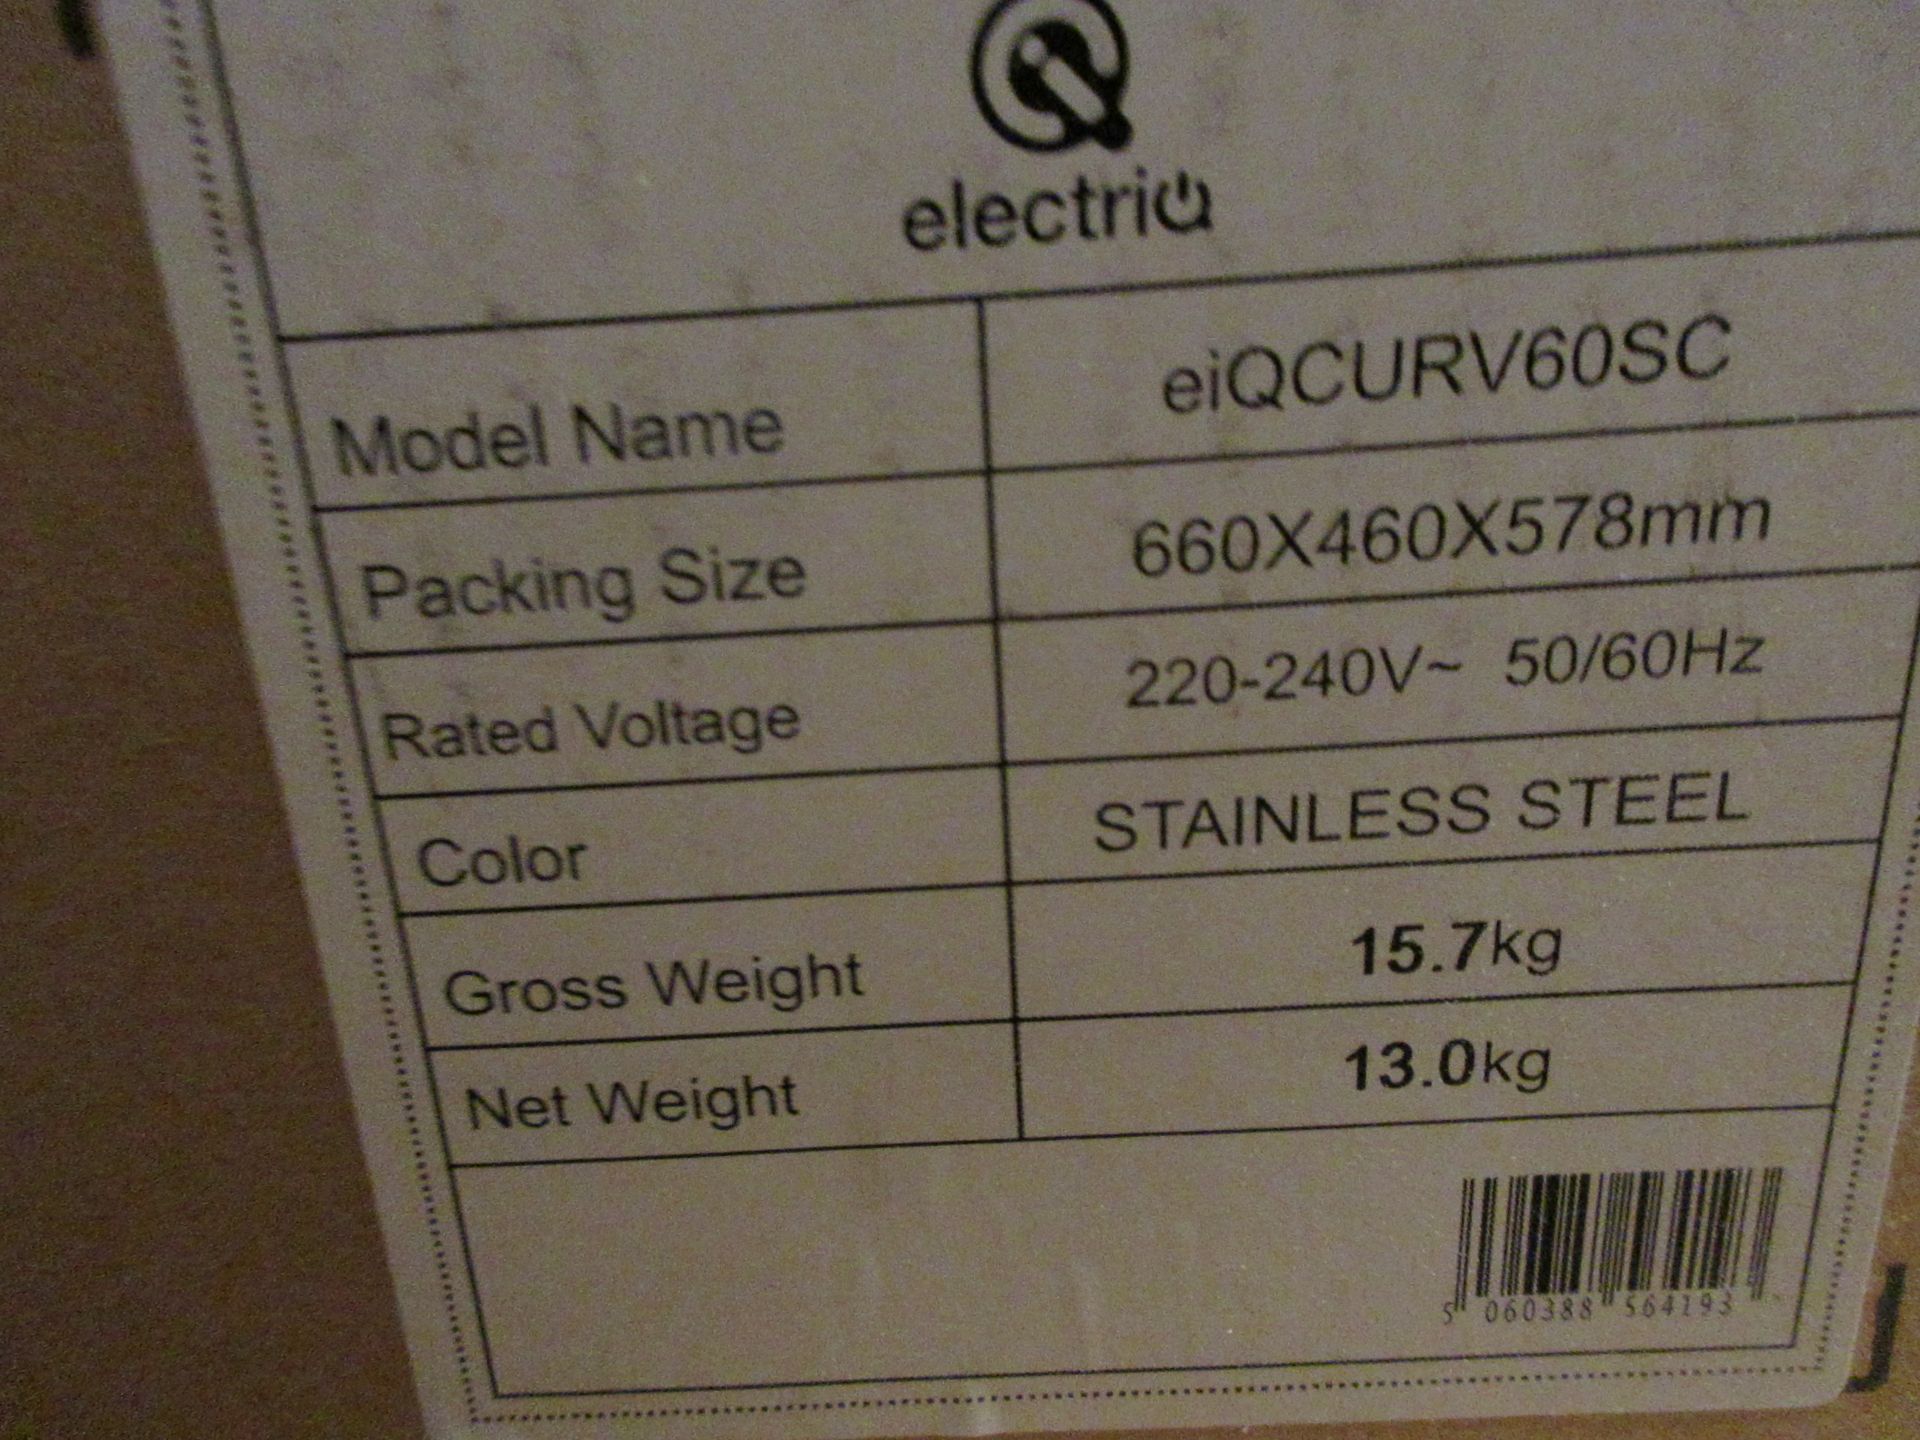 Electriq glass curved cooker hood, model IEQCURV60SC - working condition unknown - Image 4 of 6